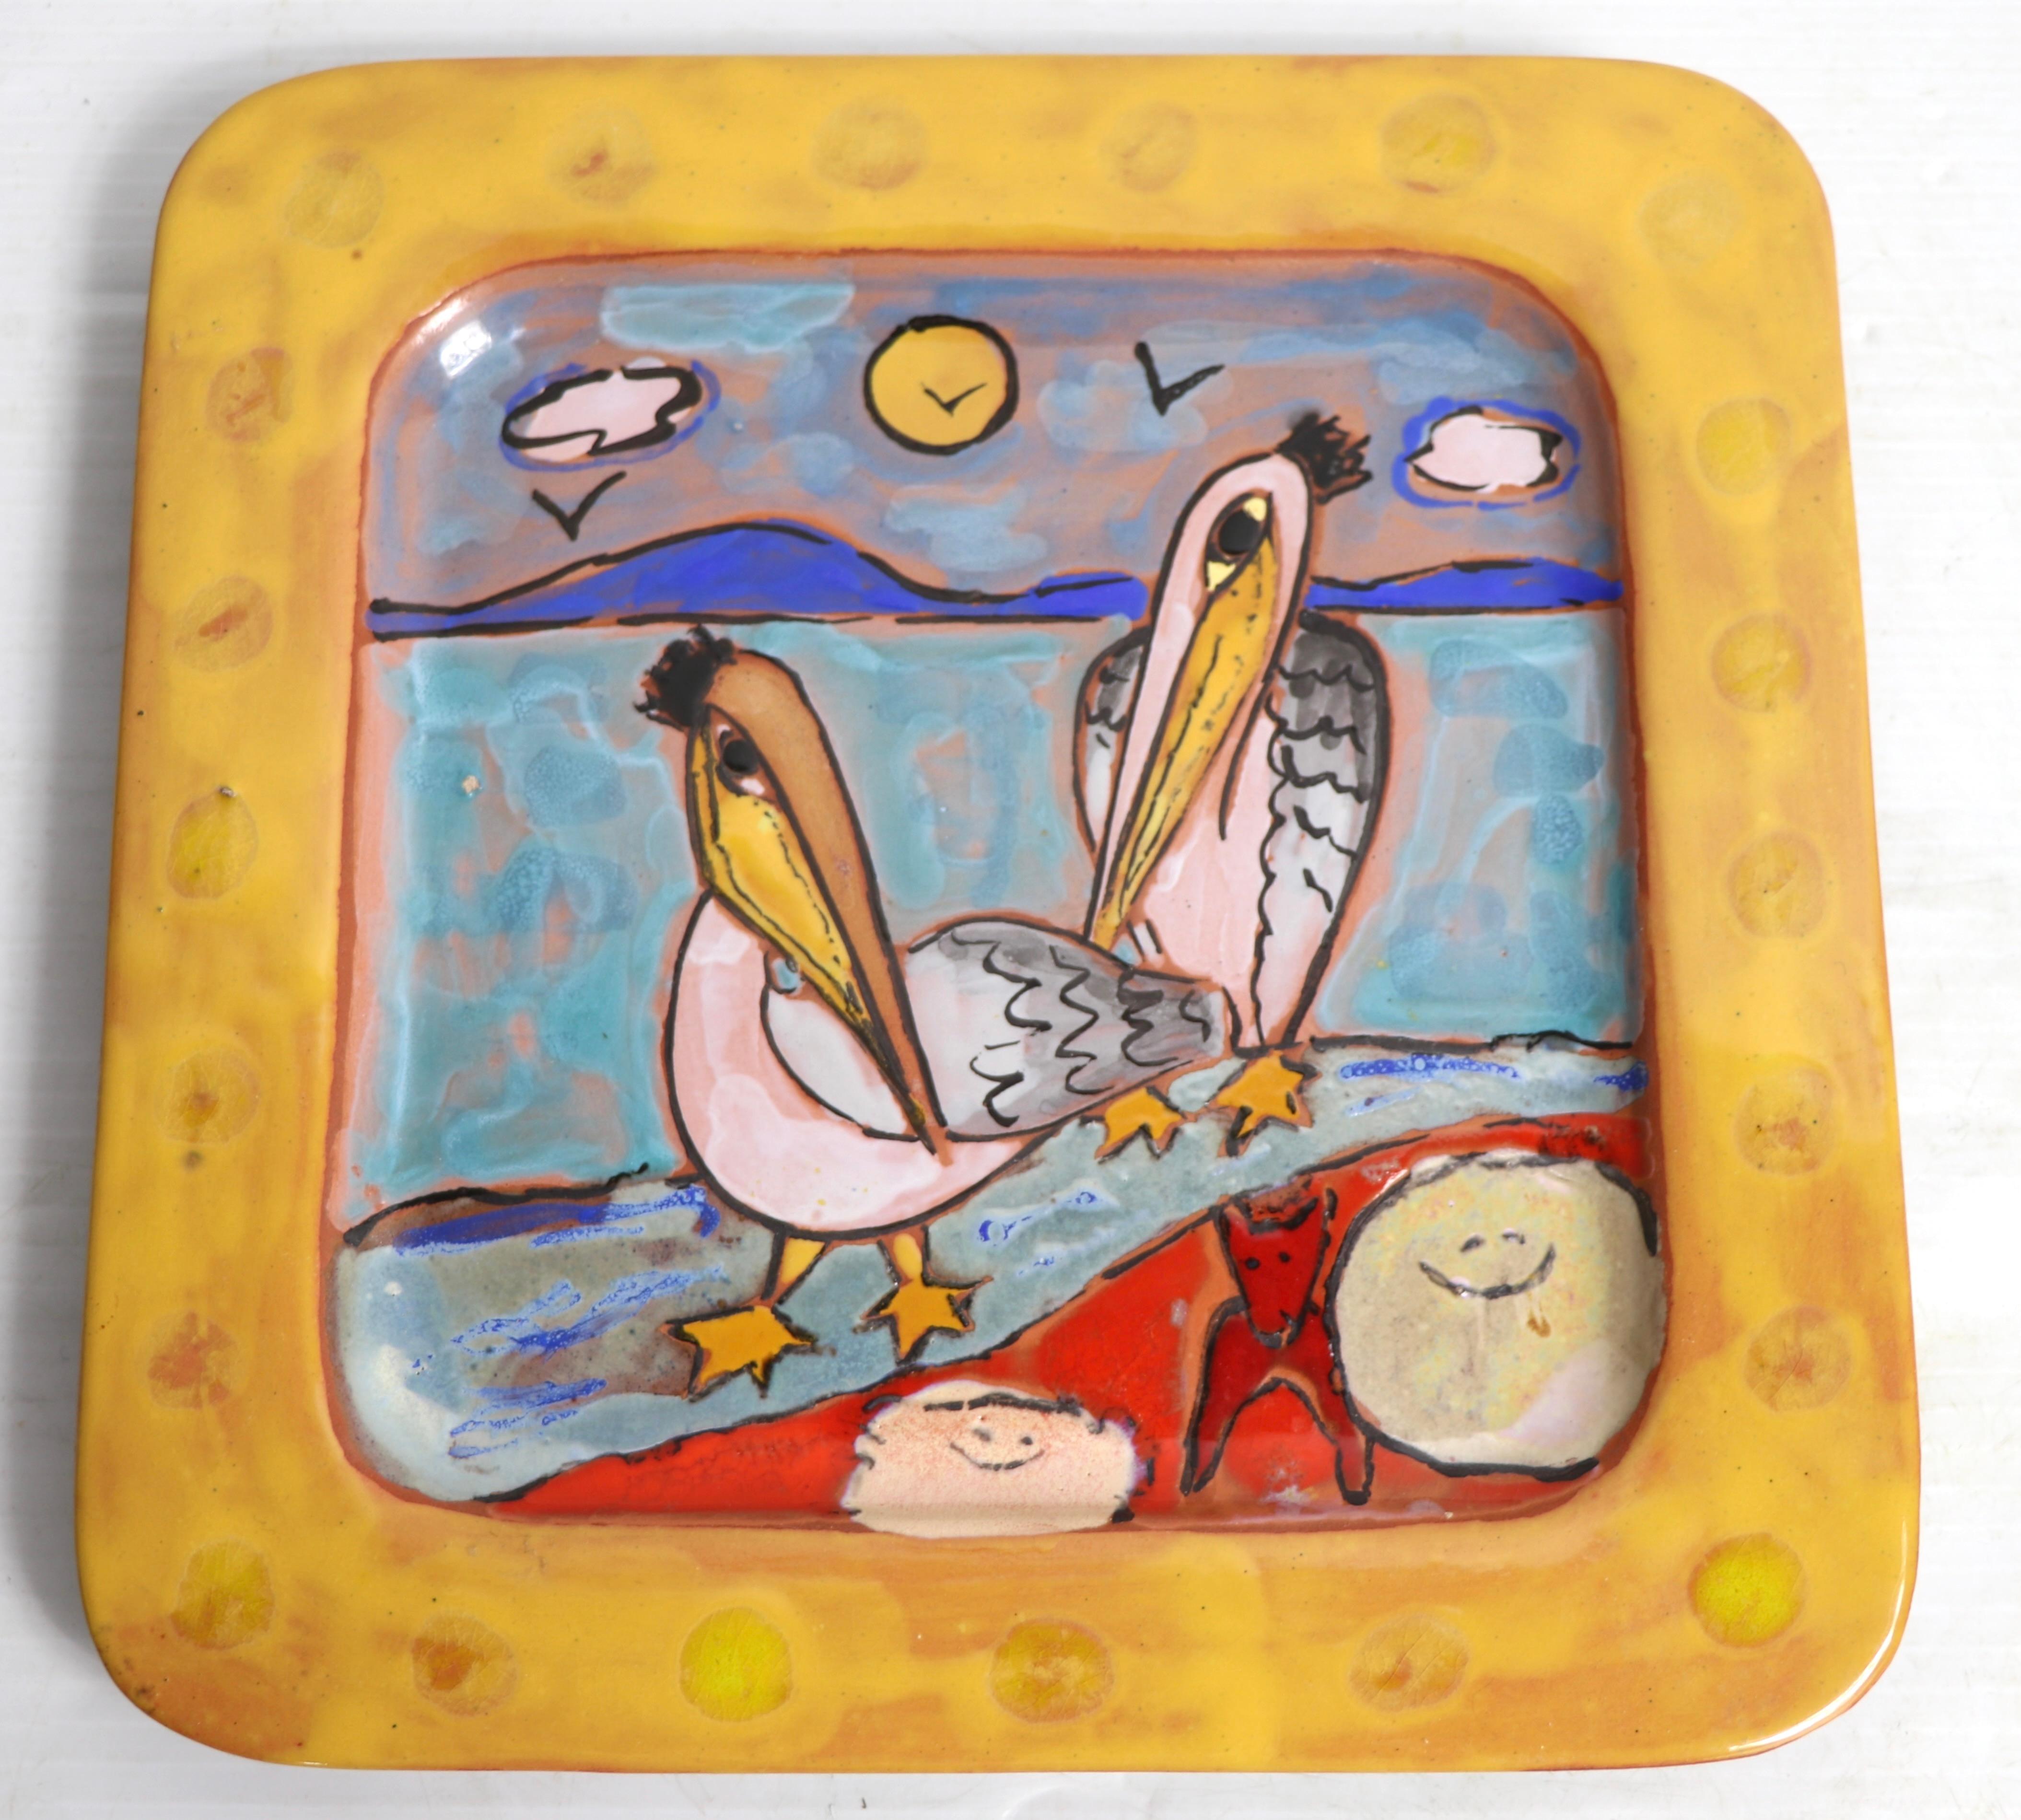 Mid-Century Modern Art Pottery Plate by Martine Azema Made in Valluris France, Ca. 1970's